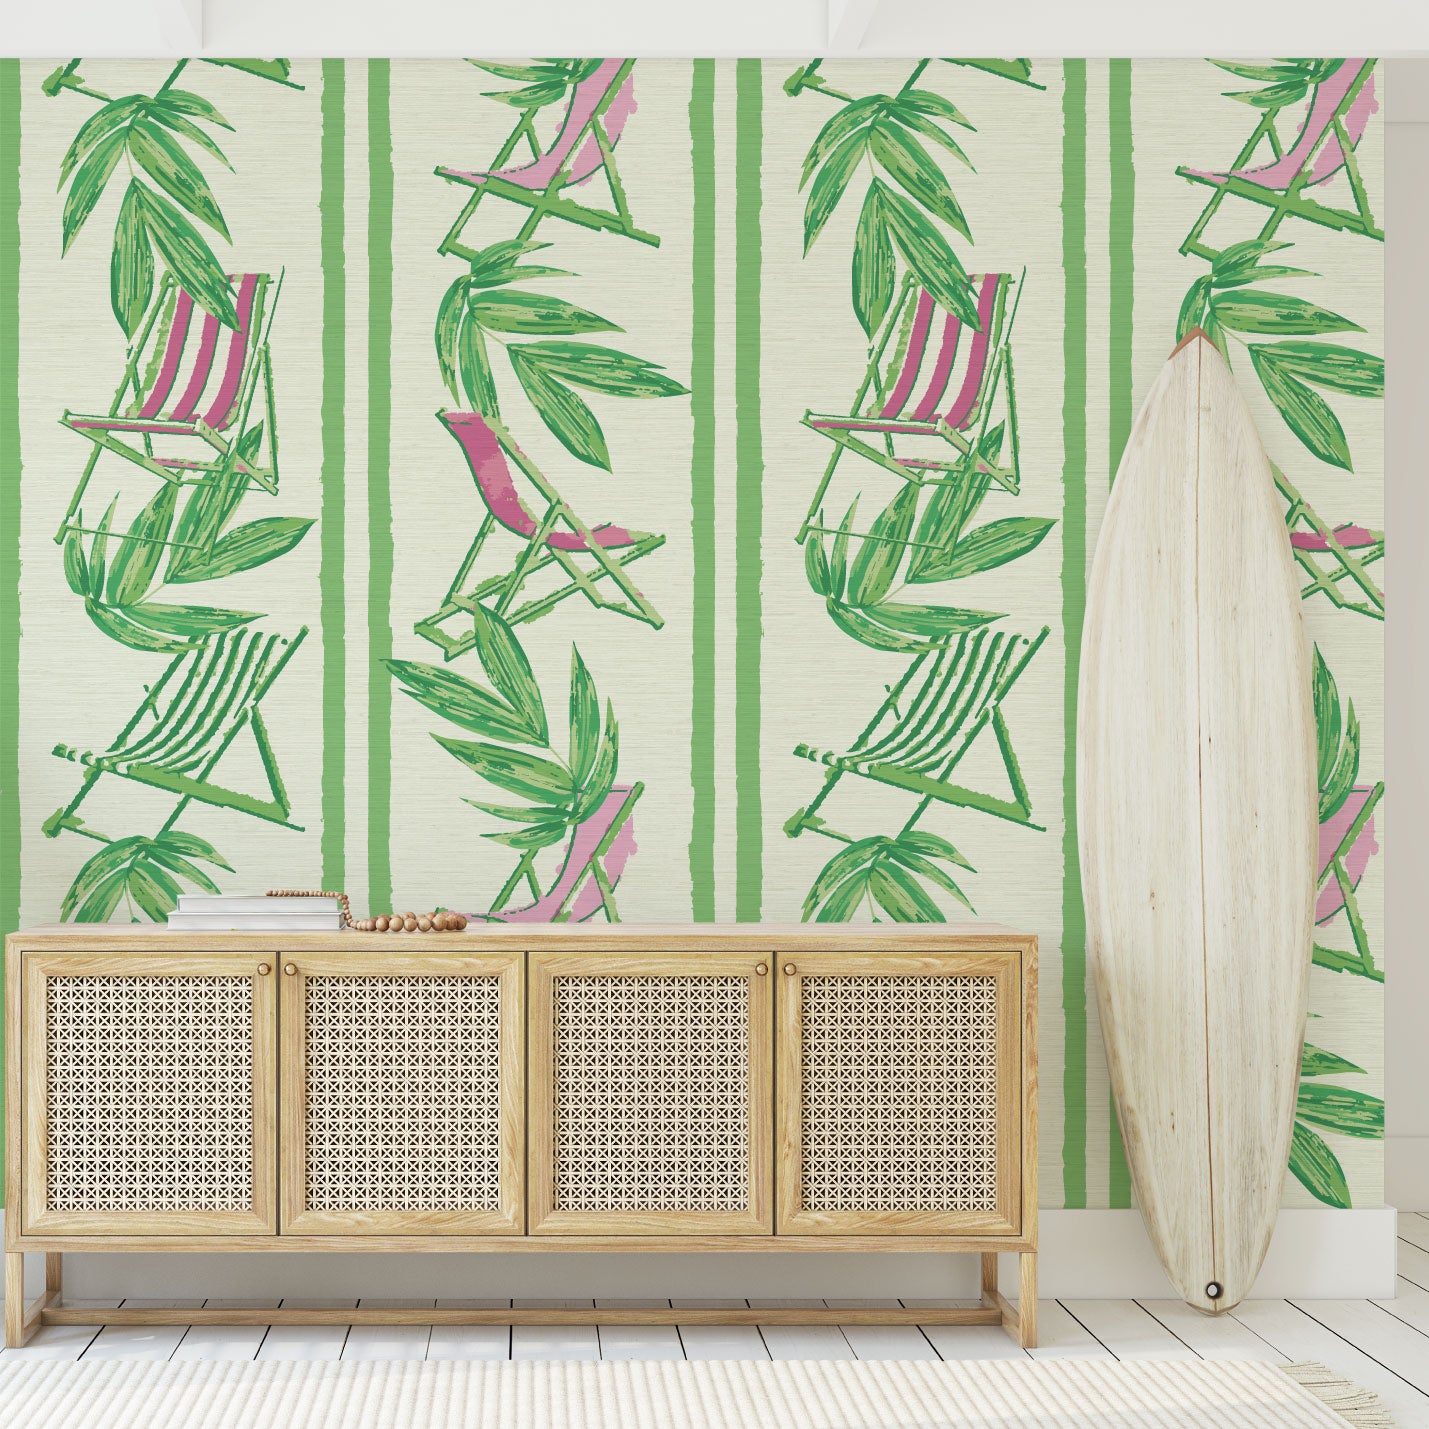 Beach house surfboard entrance with a vertical linear grasscloth wallpaper print with a beachy design of green leaves and stripes paired with green and pink beach chairs arranged in a vertical oversized stripe.